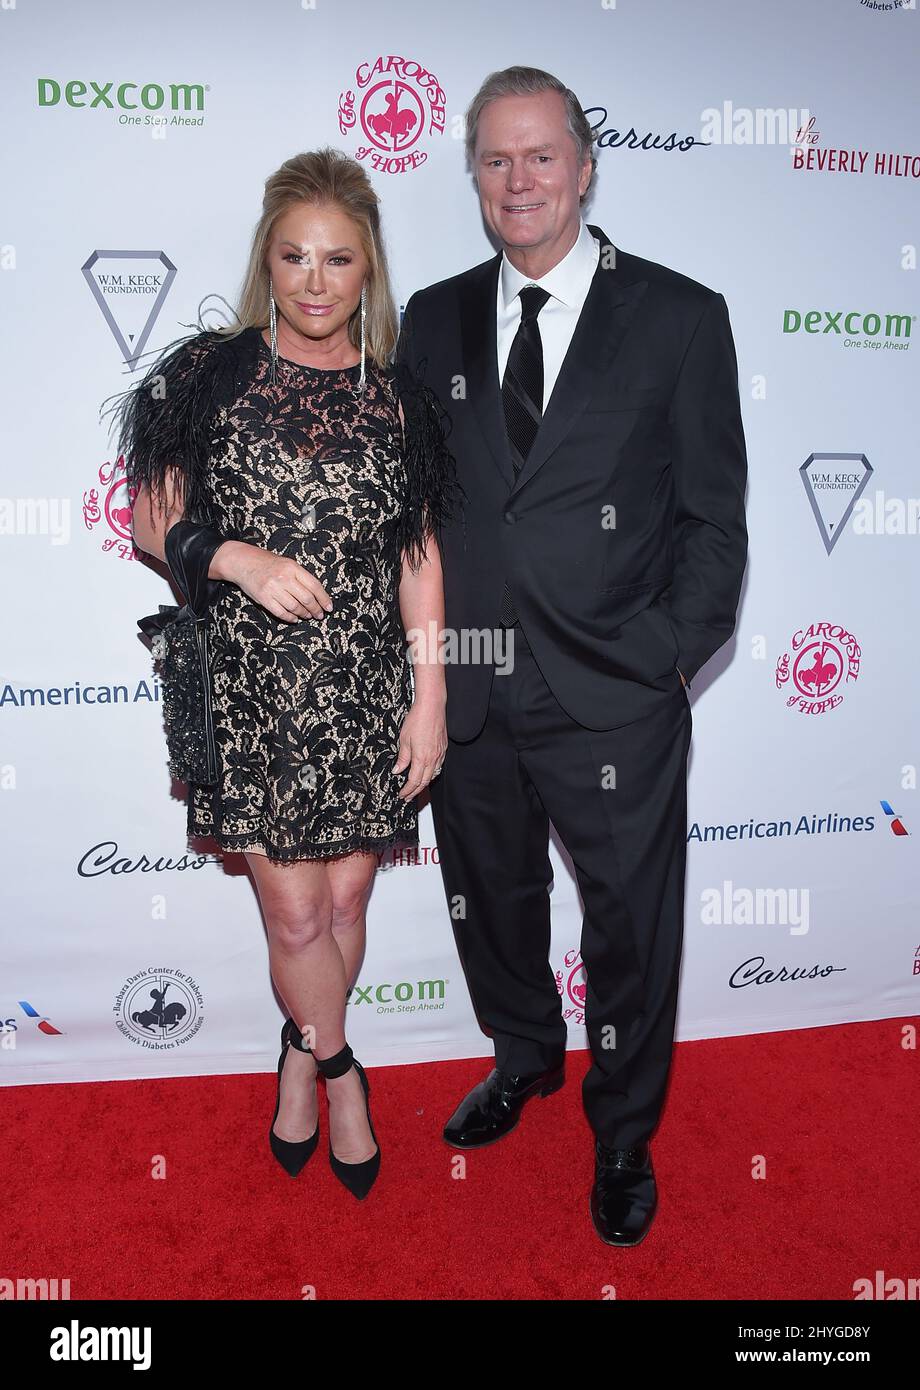 Kathy Hilton and Rick Hilton arriving to the 2018 Carousel of Hope Ball at Beverly Hilton Hotel on October 6, 2018 in Beverly Hills, CA Stock Photo